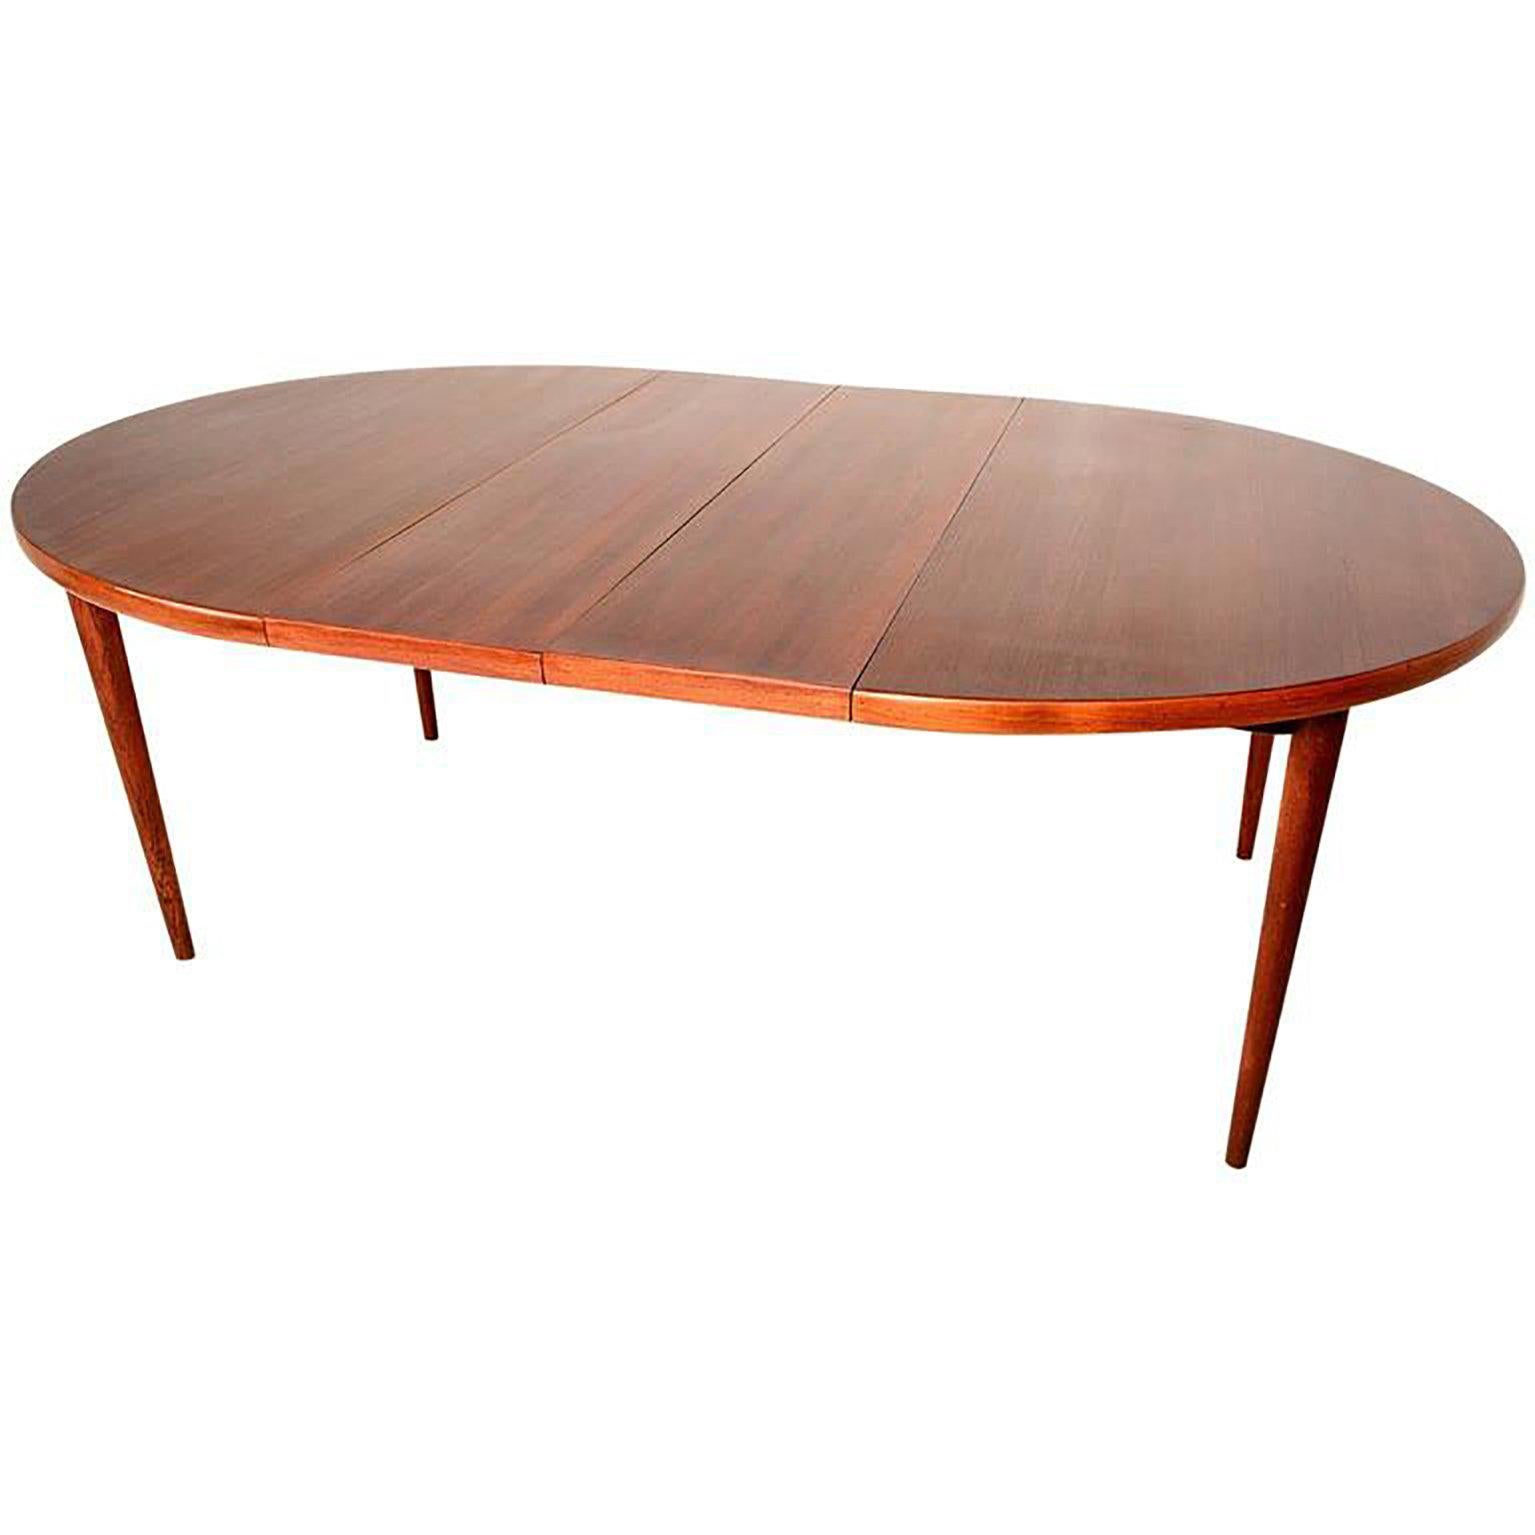 For your consideration an oval dining table in teakwood with two extensions. 

Legs can be removed for safe and easy shipping. 

Stamped underneath: 